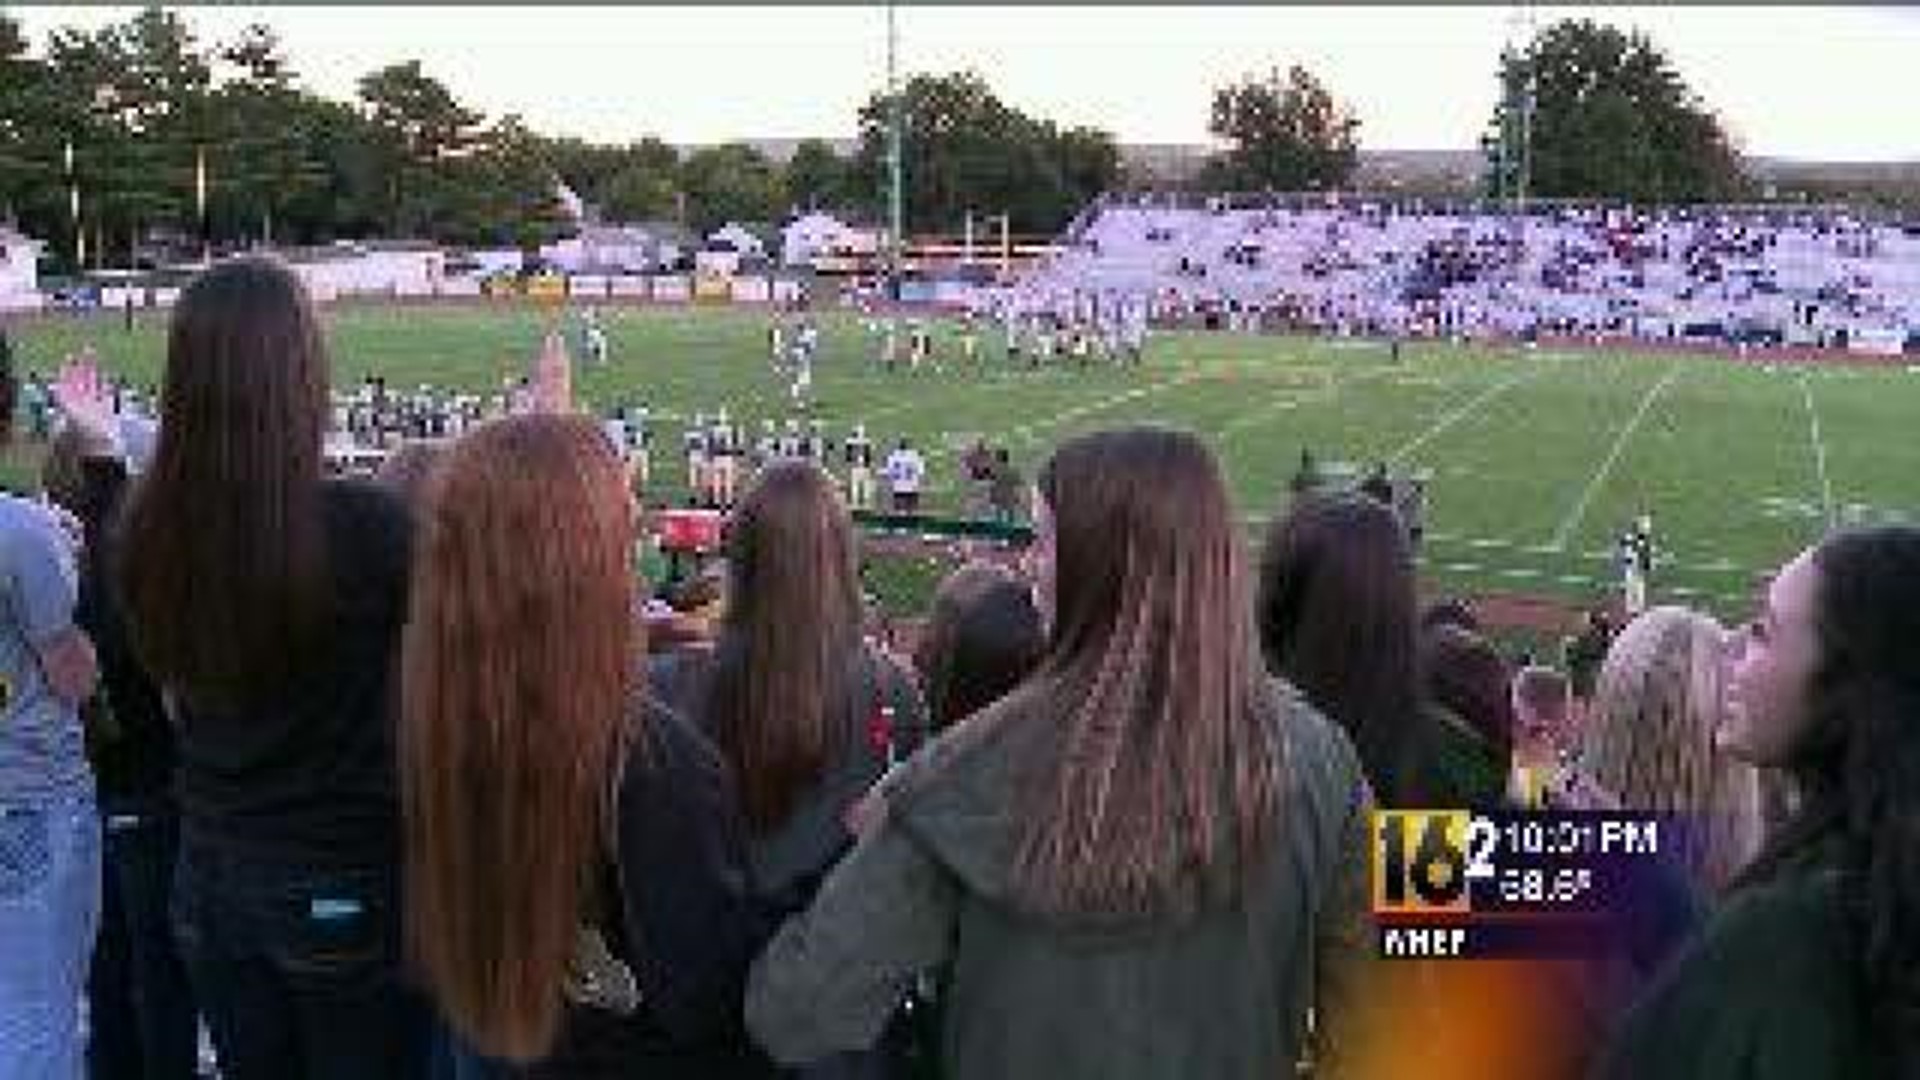 Teachers’ Strike Affected Coaches For Wyoming Area Football